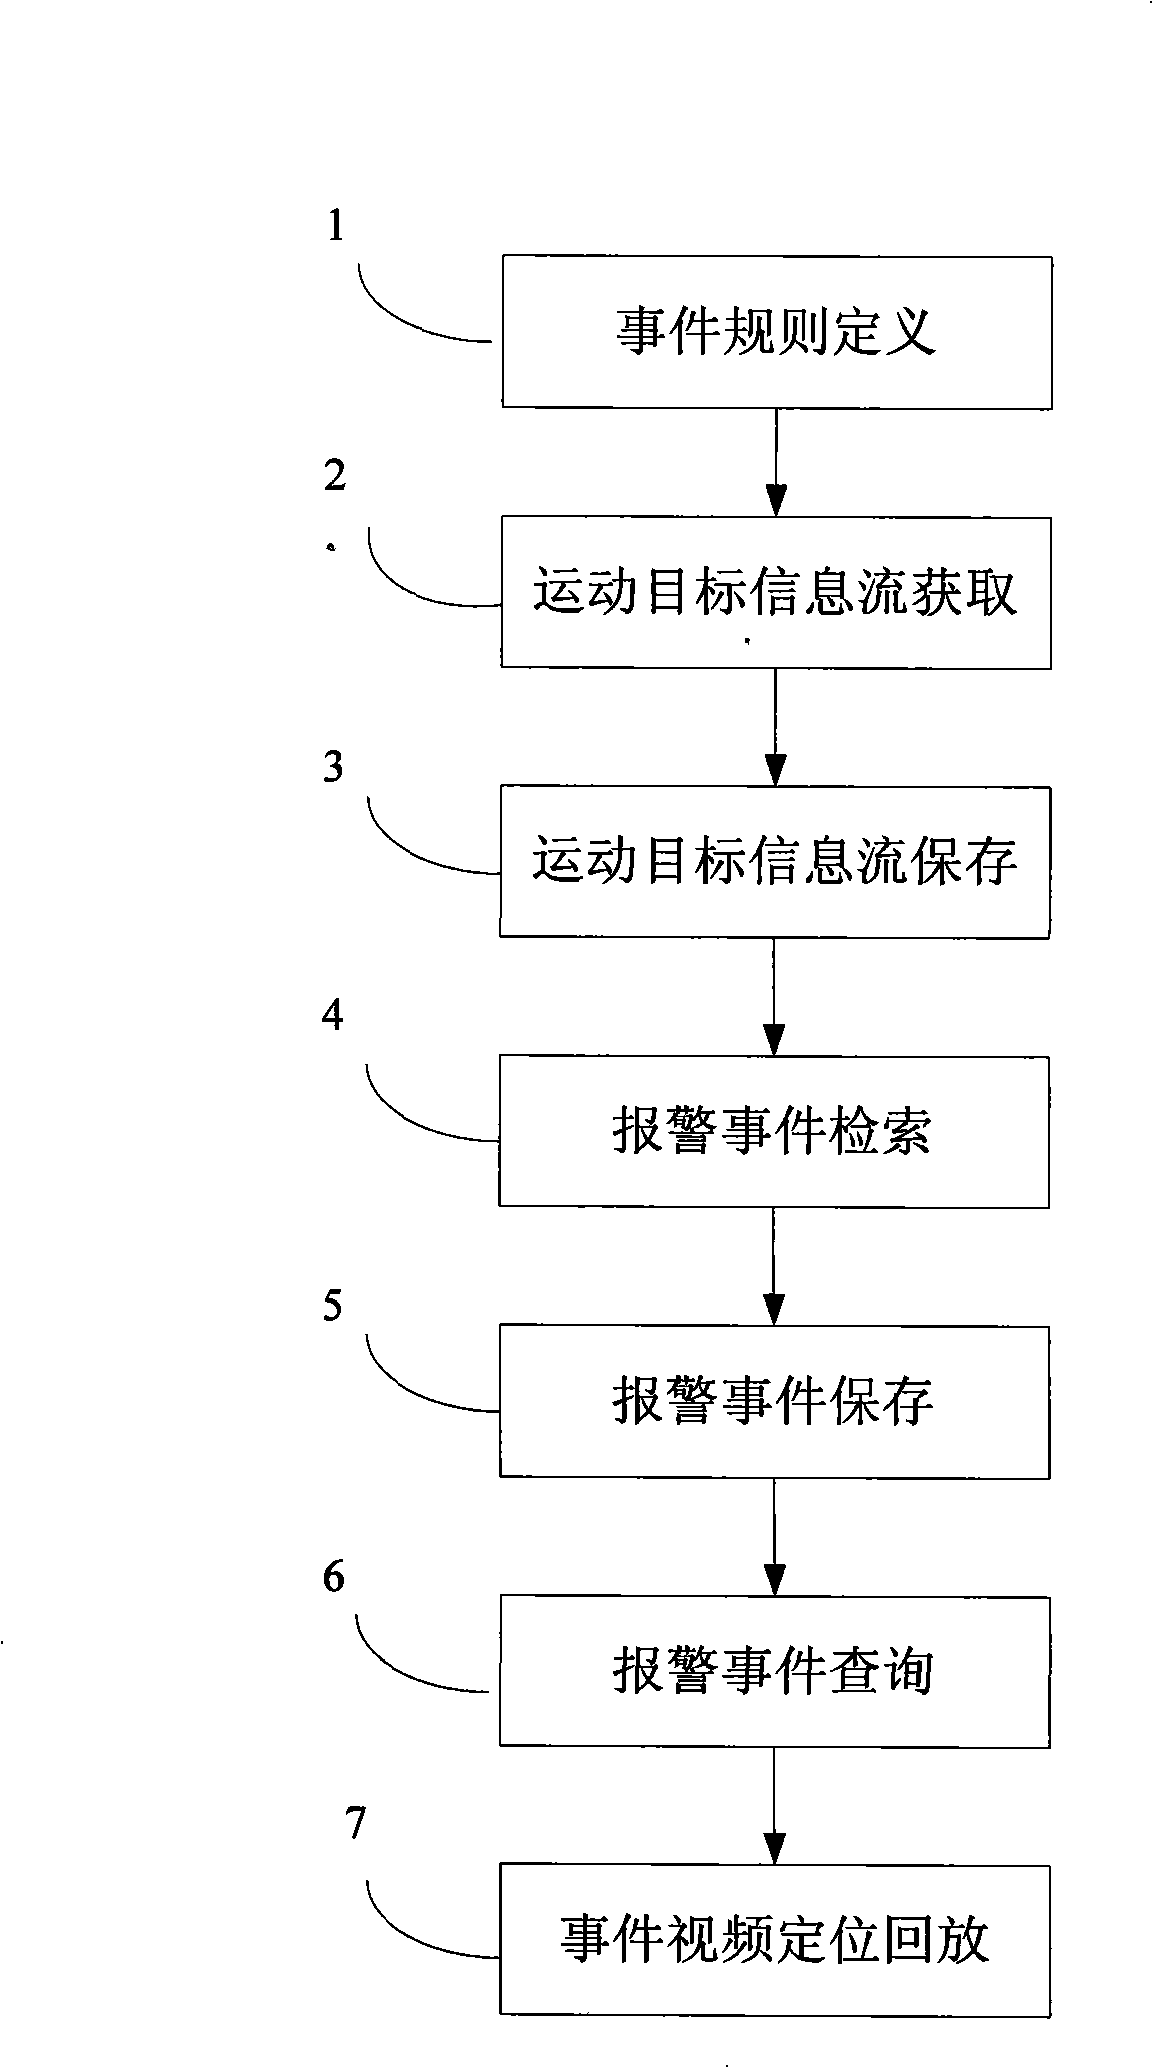 Method and system for researching intelligent video monitoring case